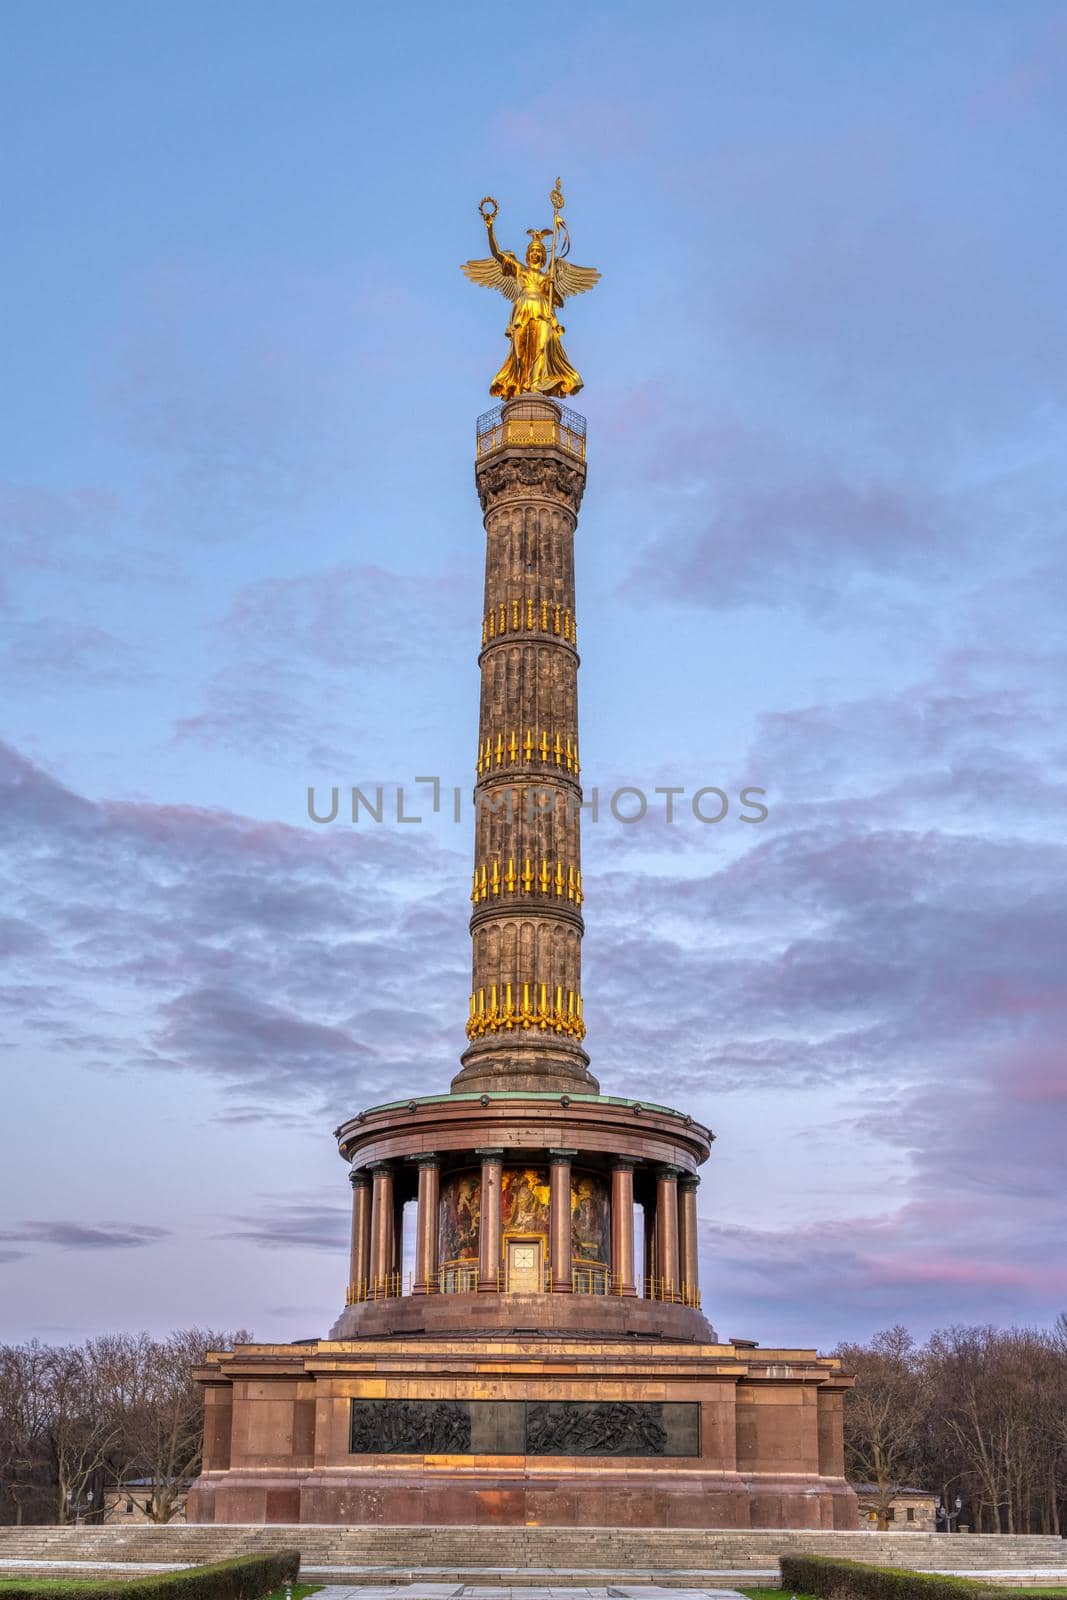 The Victory Column in the Tiergarten in Berlin, Germany, after sunset